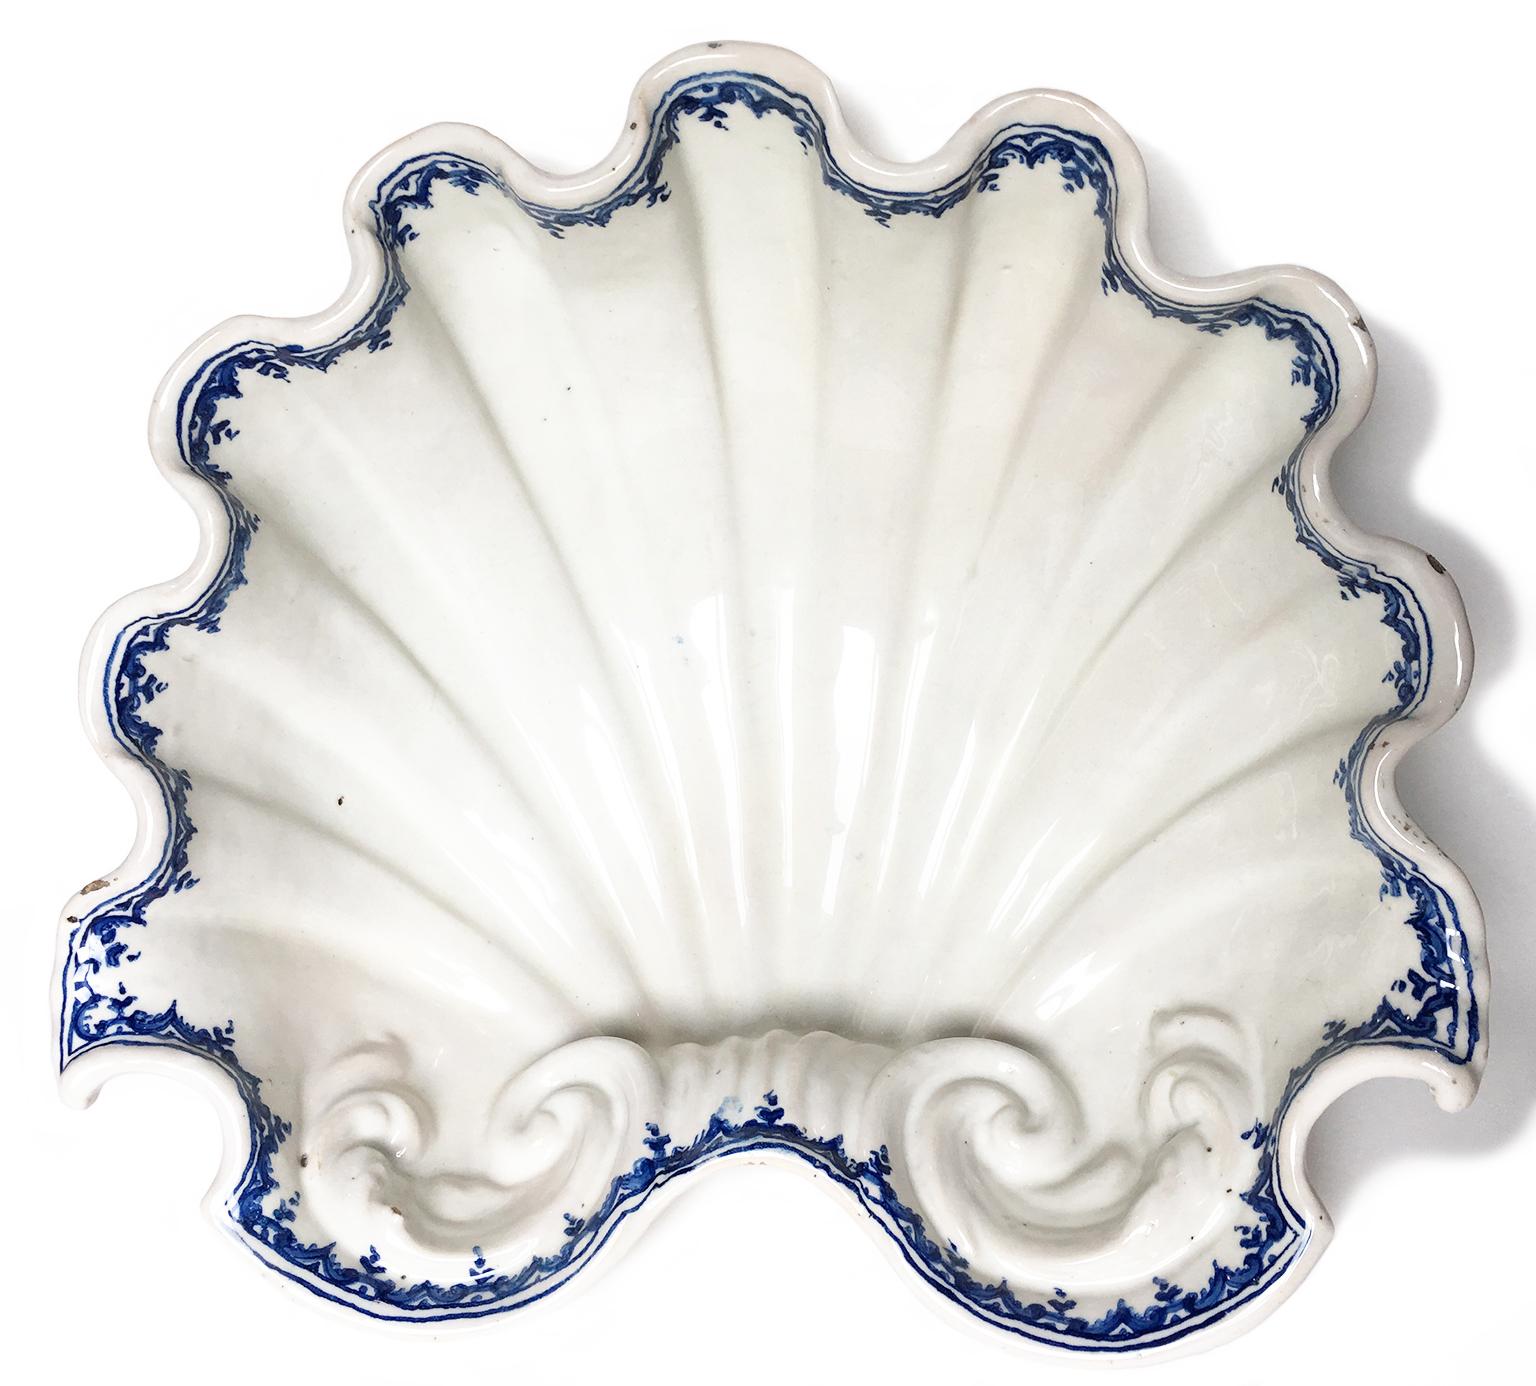 Centerpiece white maiolica shell
Ferniani factory, early period: 1693-1776
Faenza, circa 1700 
Measures: 5.6 in x 14.72 in x 13.46 in (14.3 cm x 37.4 cm x cm 34.2)
lb 4.4 each (kg 2)

State of conservation: mimetic restoration on the front and